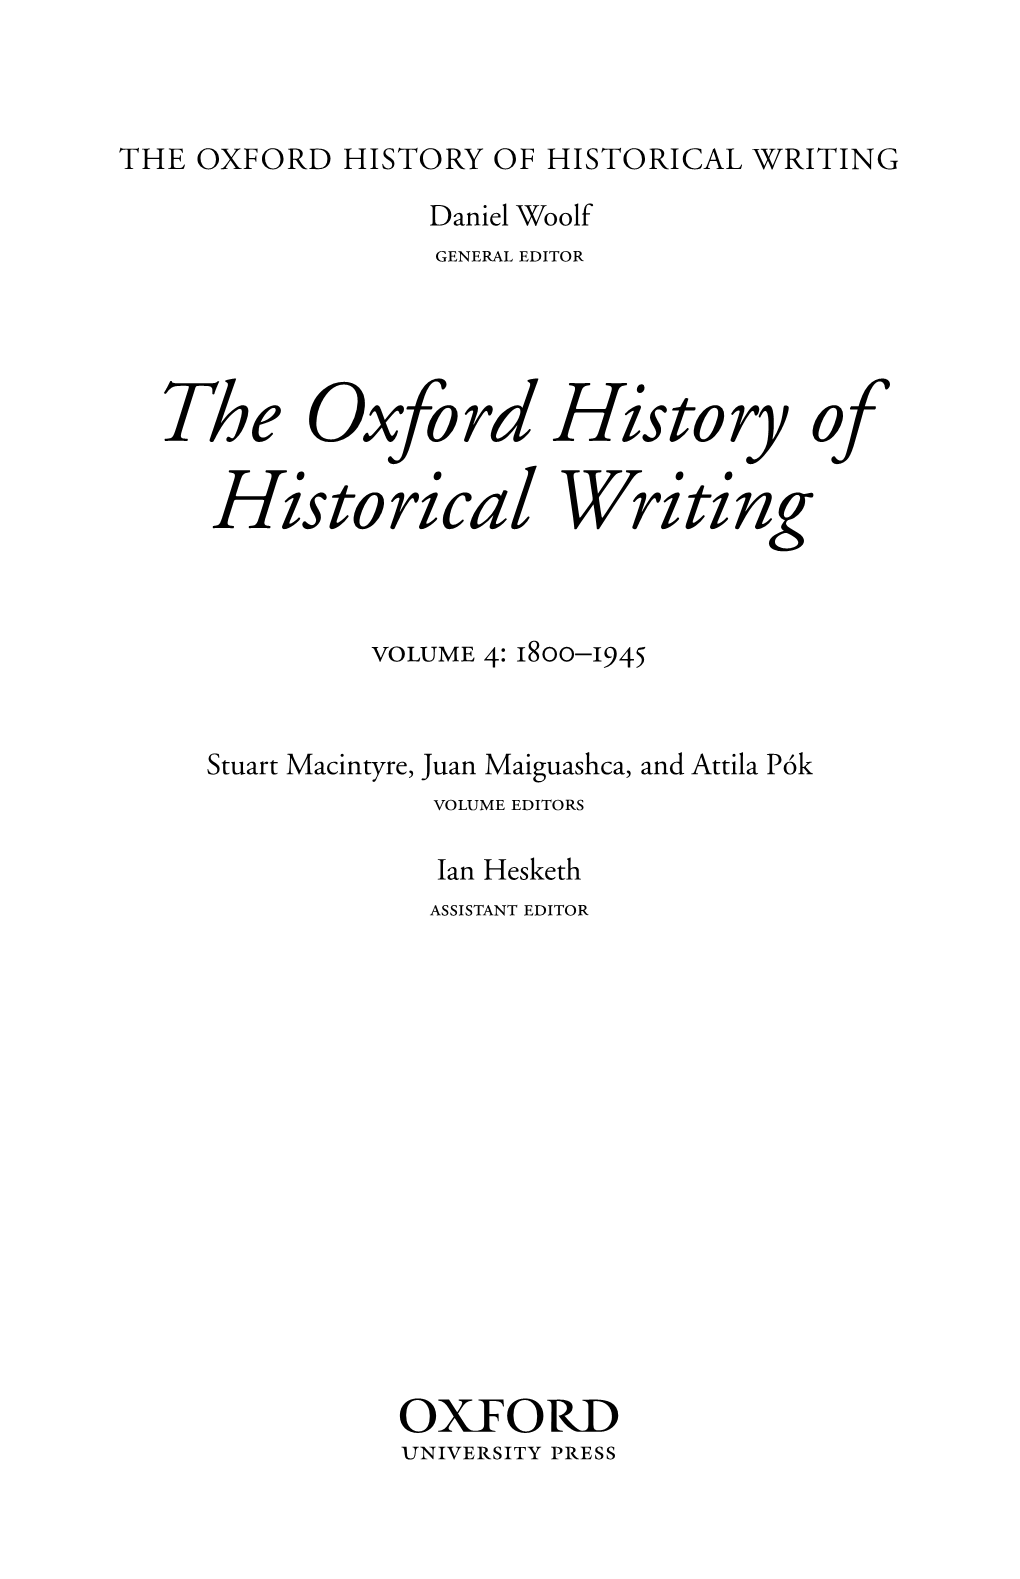 THE OXFORD HISTORY of HISTORICAL WRITING Daniel Woolf General Editor